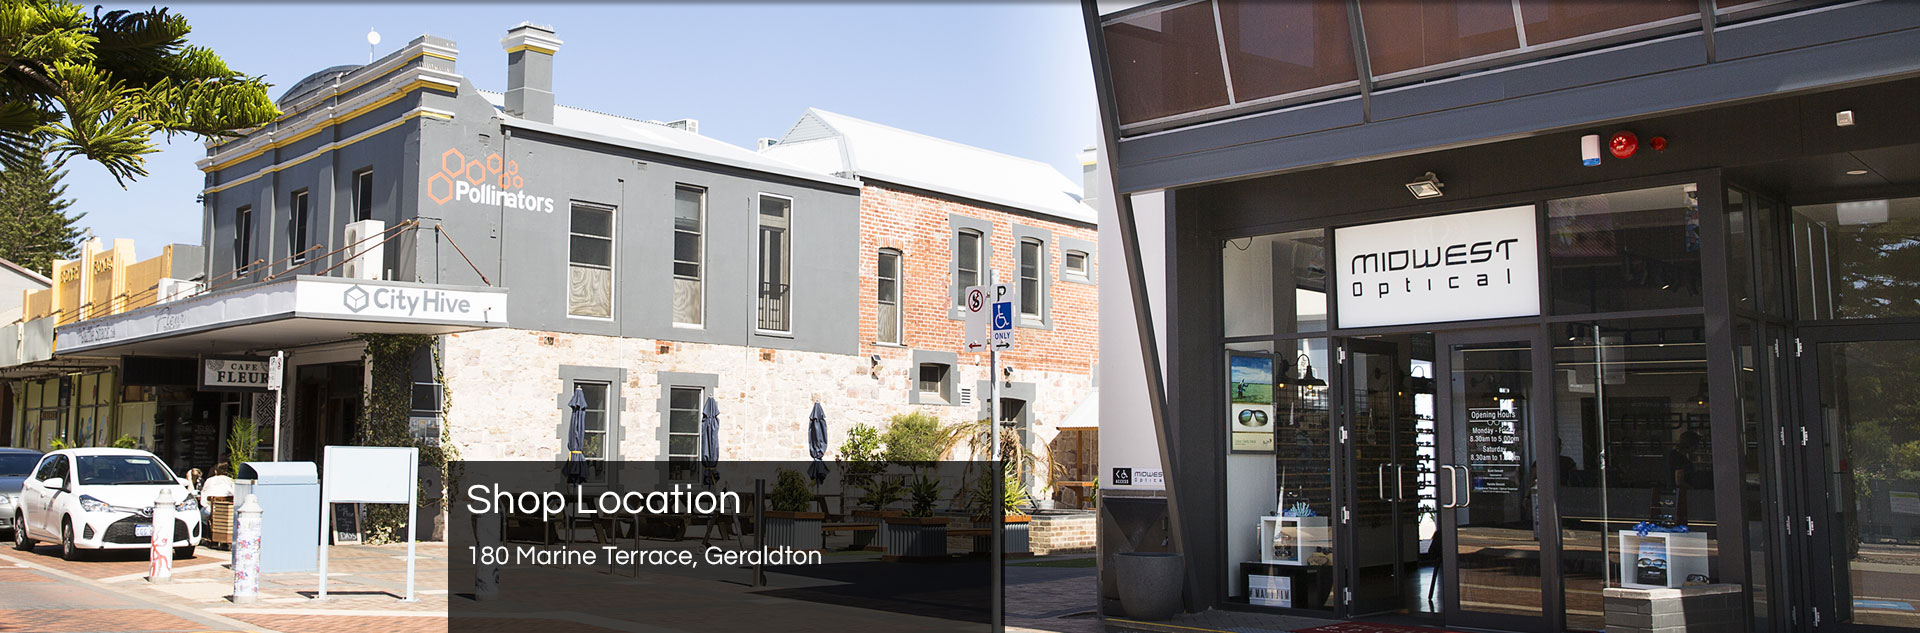 We are located at 180 Marriane Terrace in Geraldton